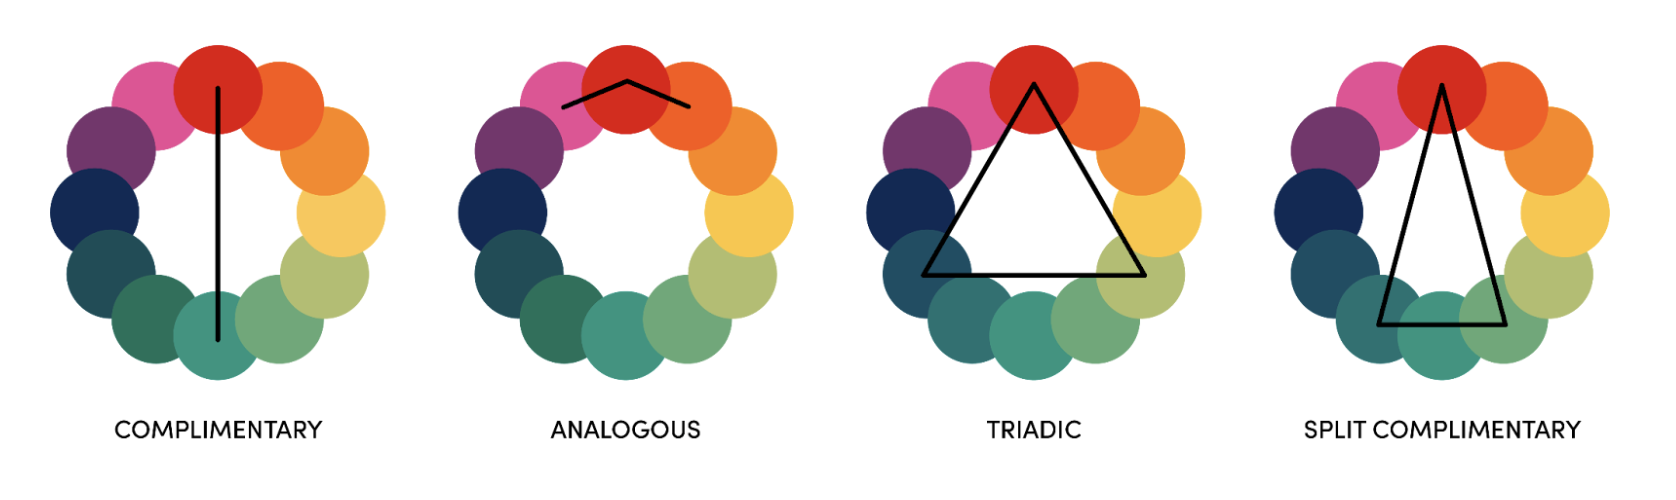 Color wheel diagrams illustrating four color harmony schemes.